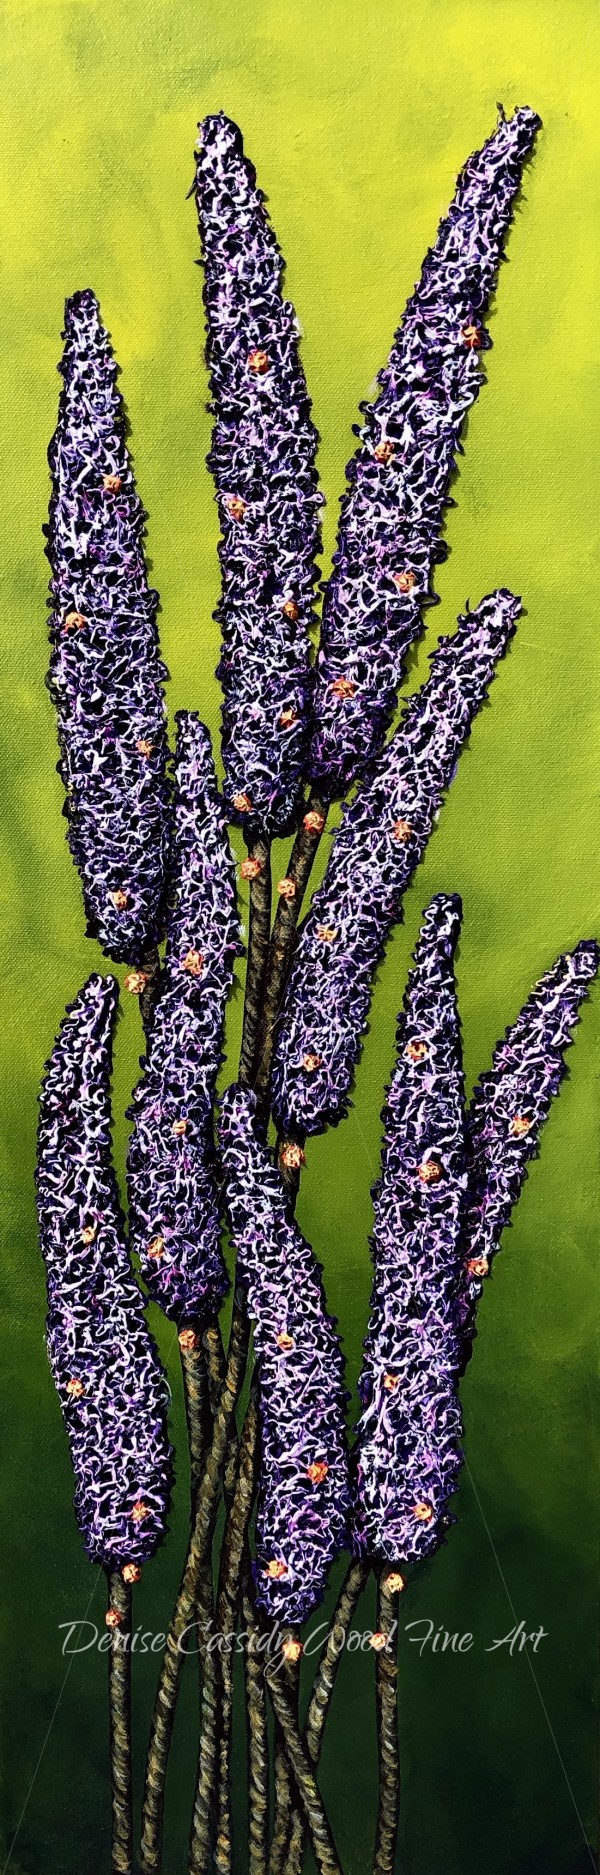 Lavender #786 by Denise Cassidy Wood